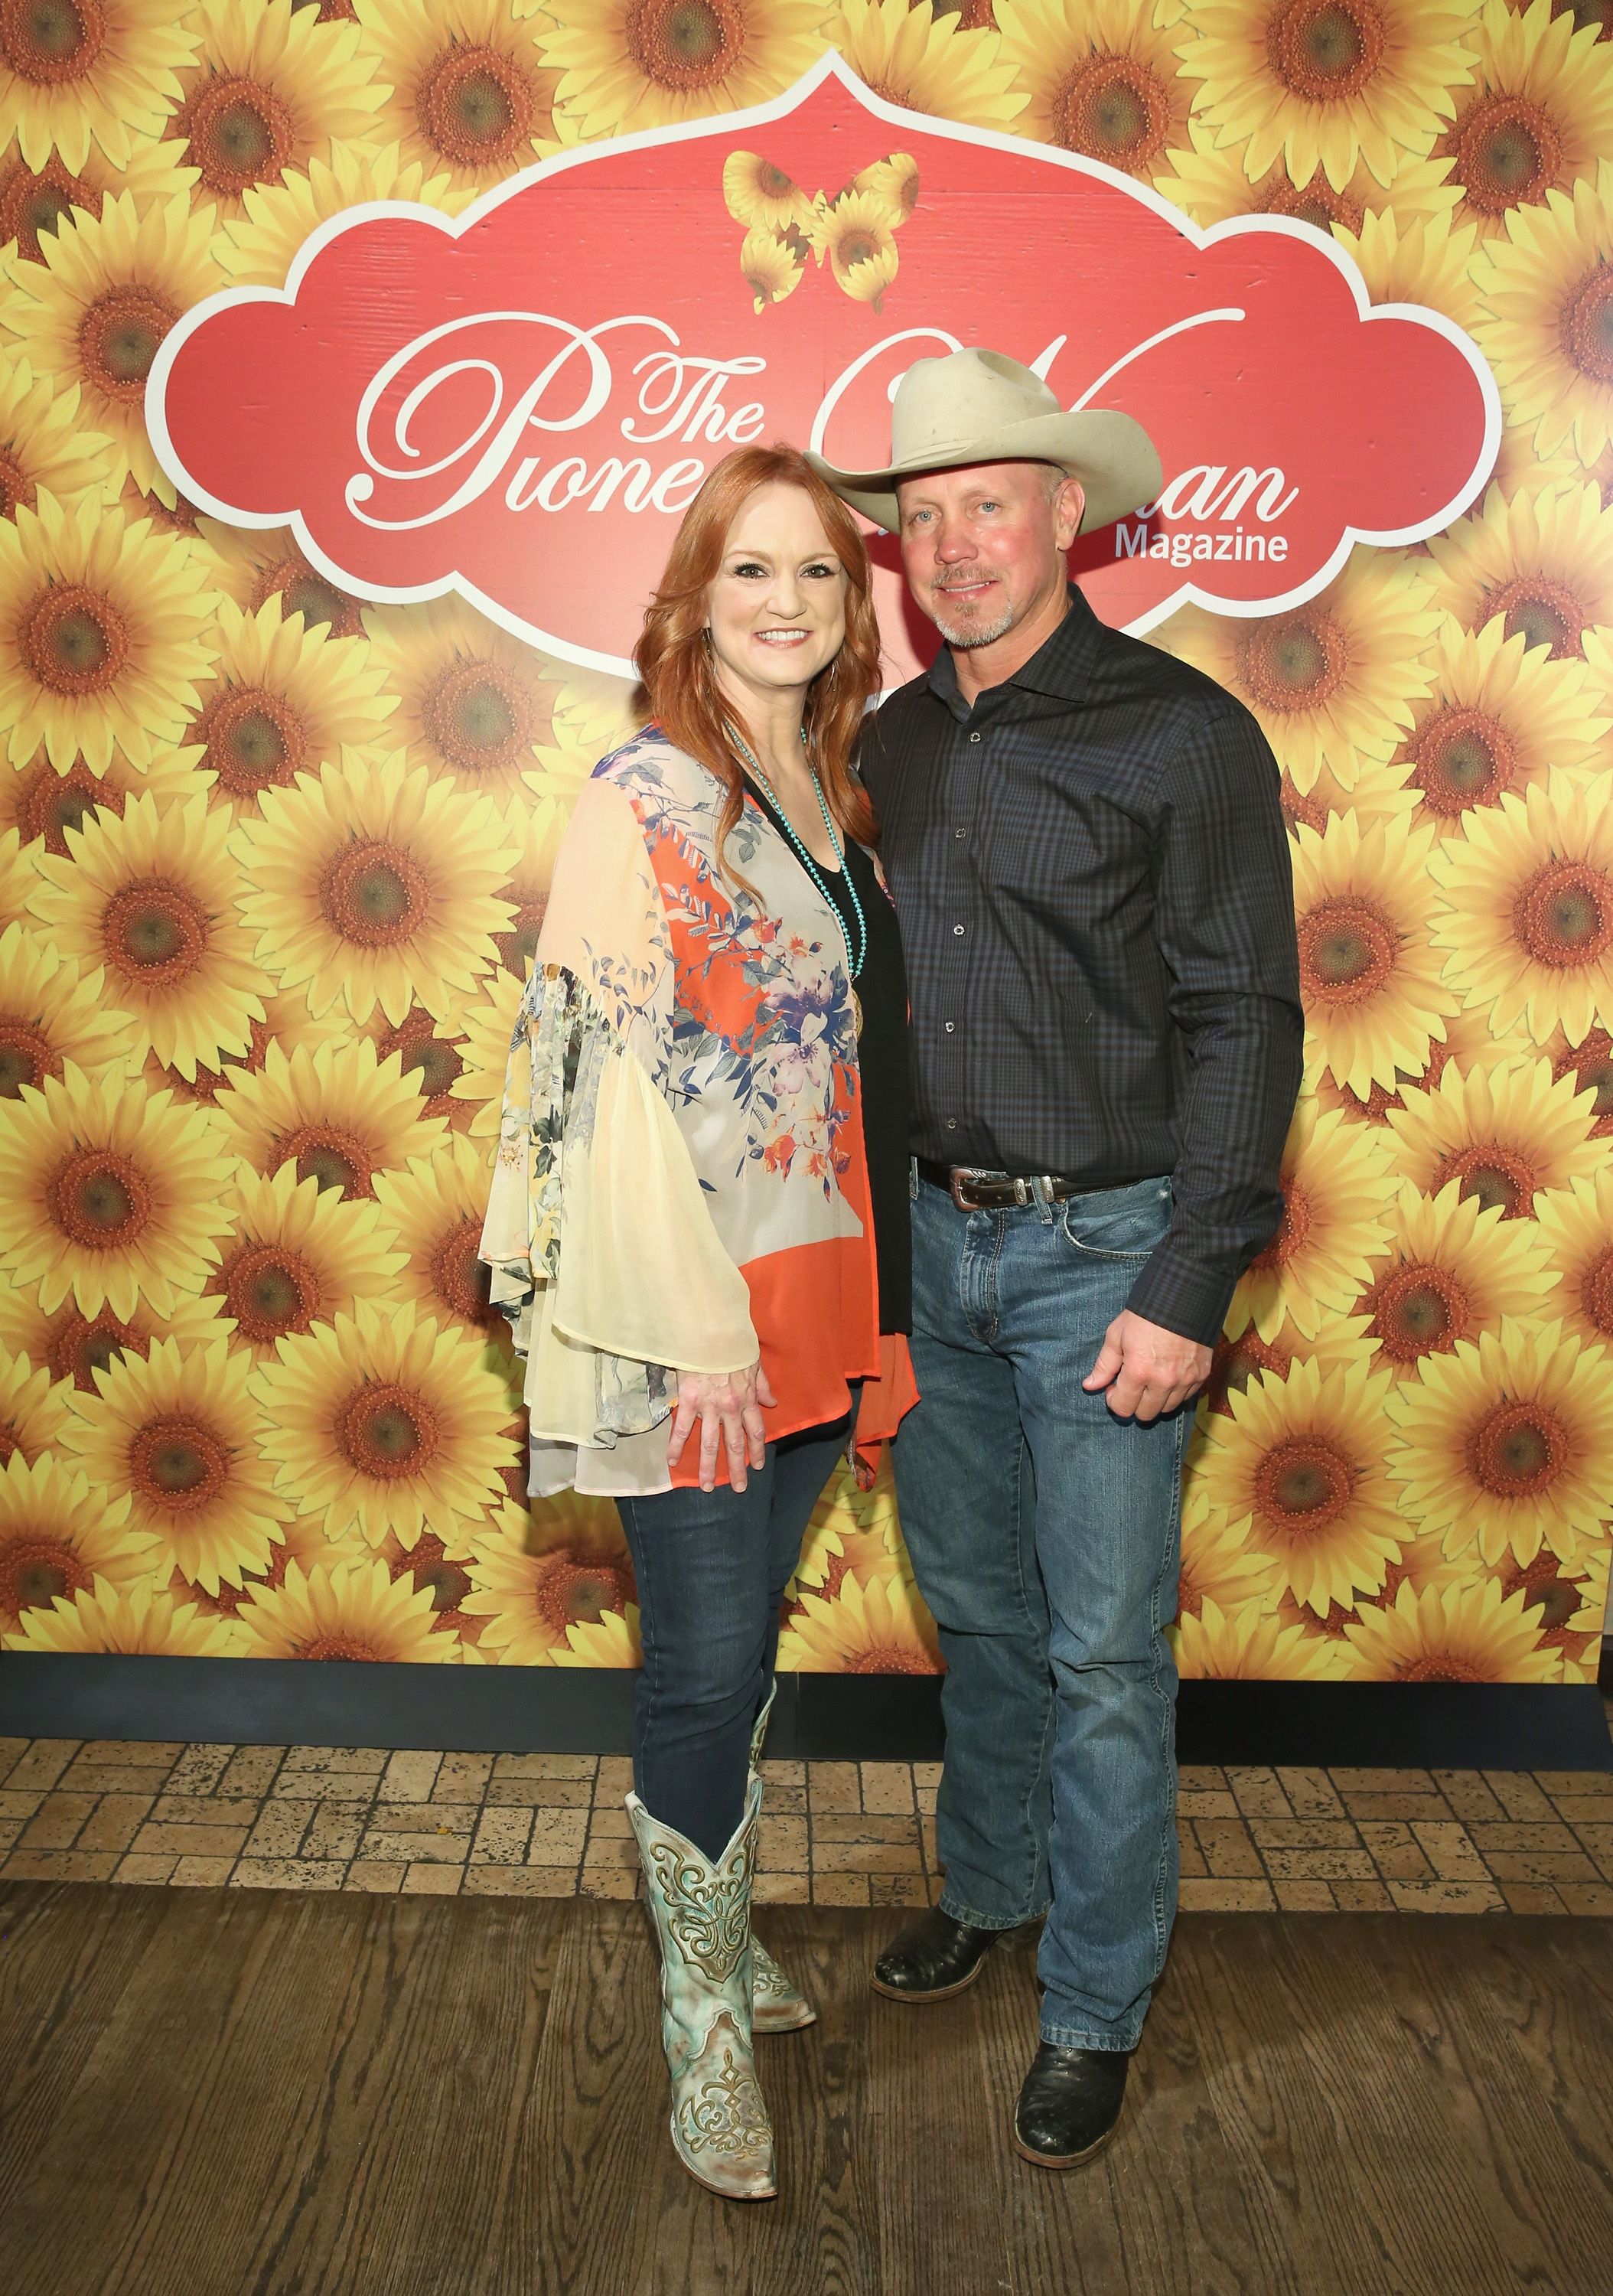 Ree and Ladd Drummond pose for a photo during "The Pioneer Woman Magazine Celebration with Ree Drummond" on June 6, 2017, in New York City | Photo: Monica Schipper/Getty Images